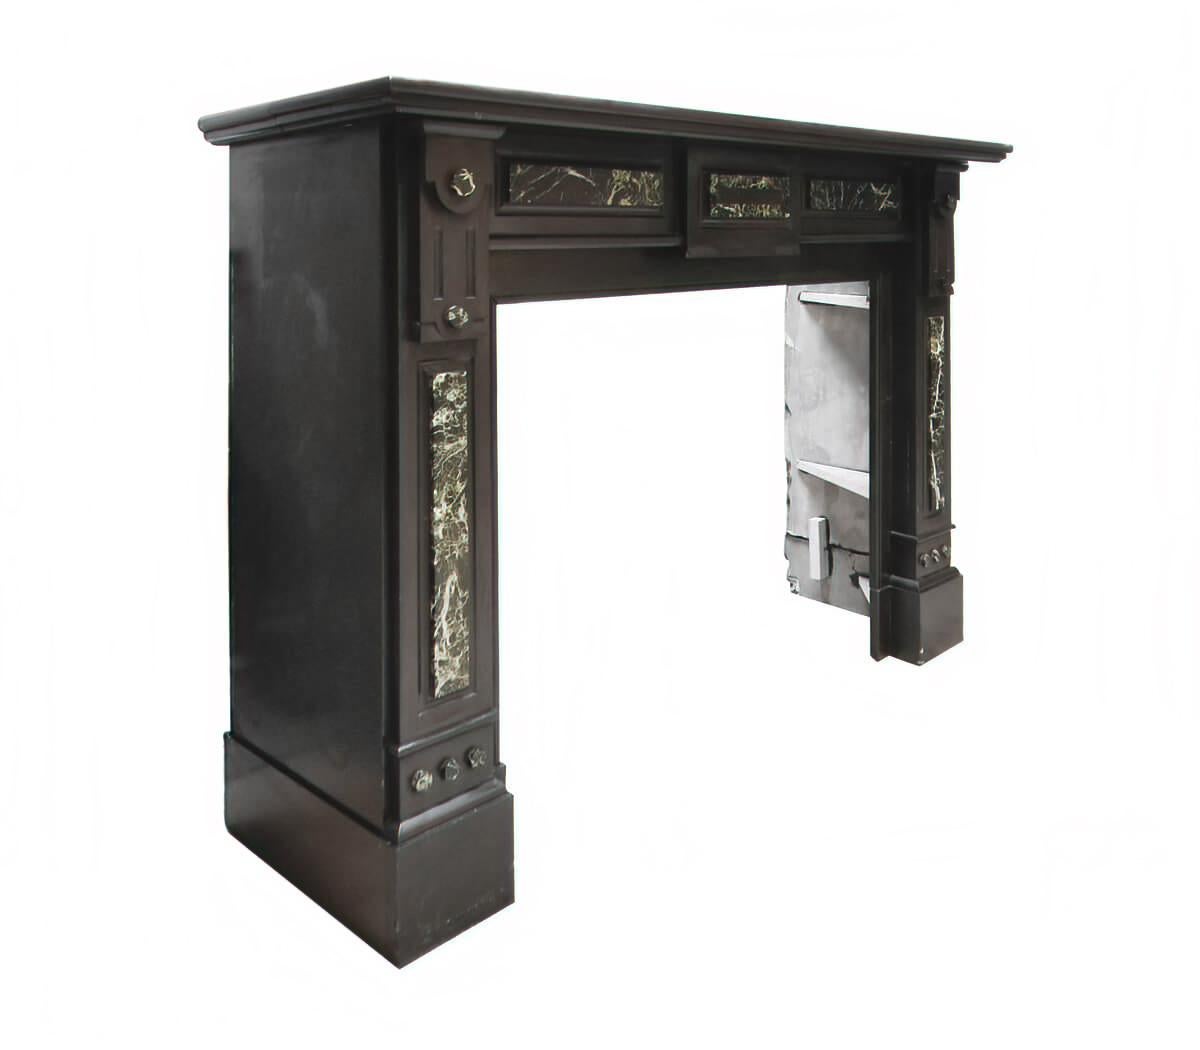 Black marble Noir de Mazy with gray/green imposed fireplace mantel from
the 19th Century to place around the chimney.